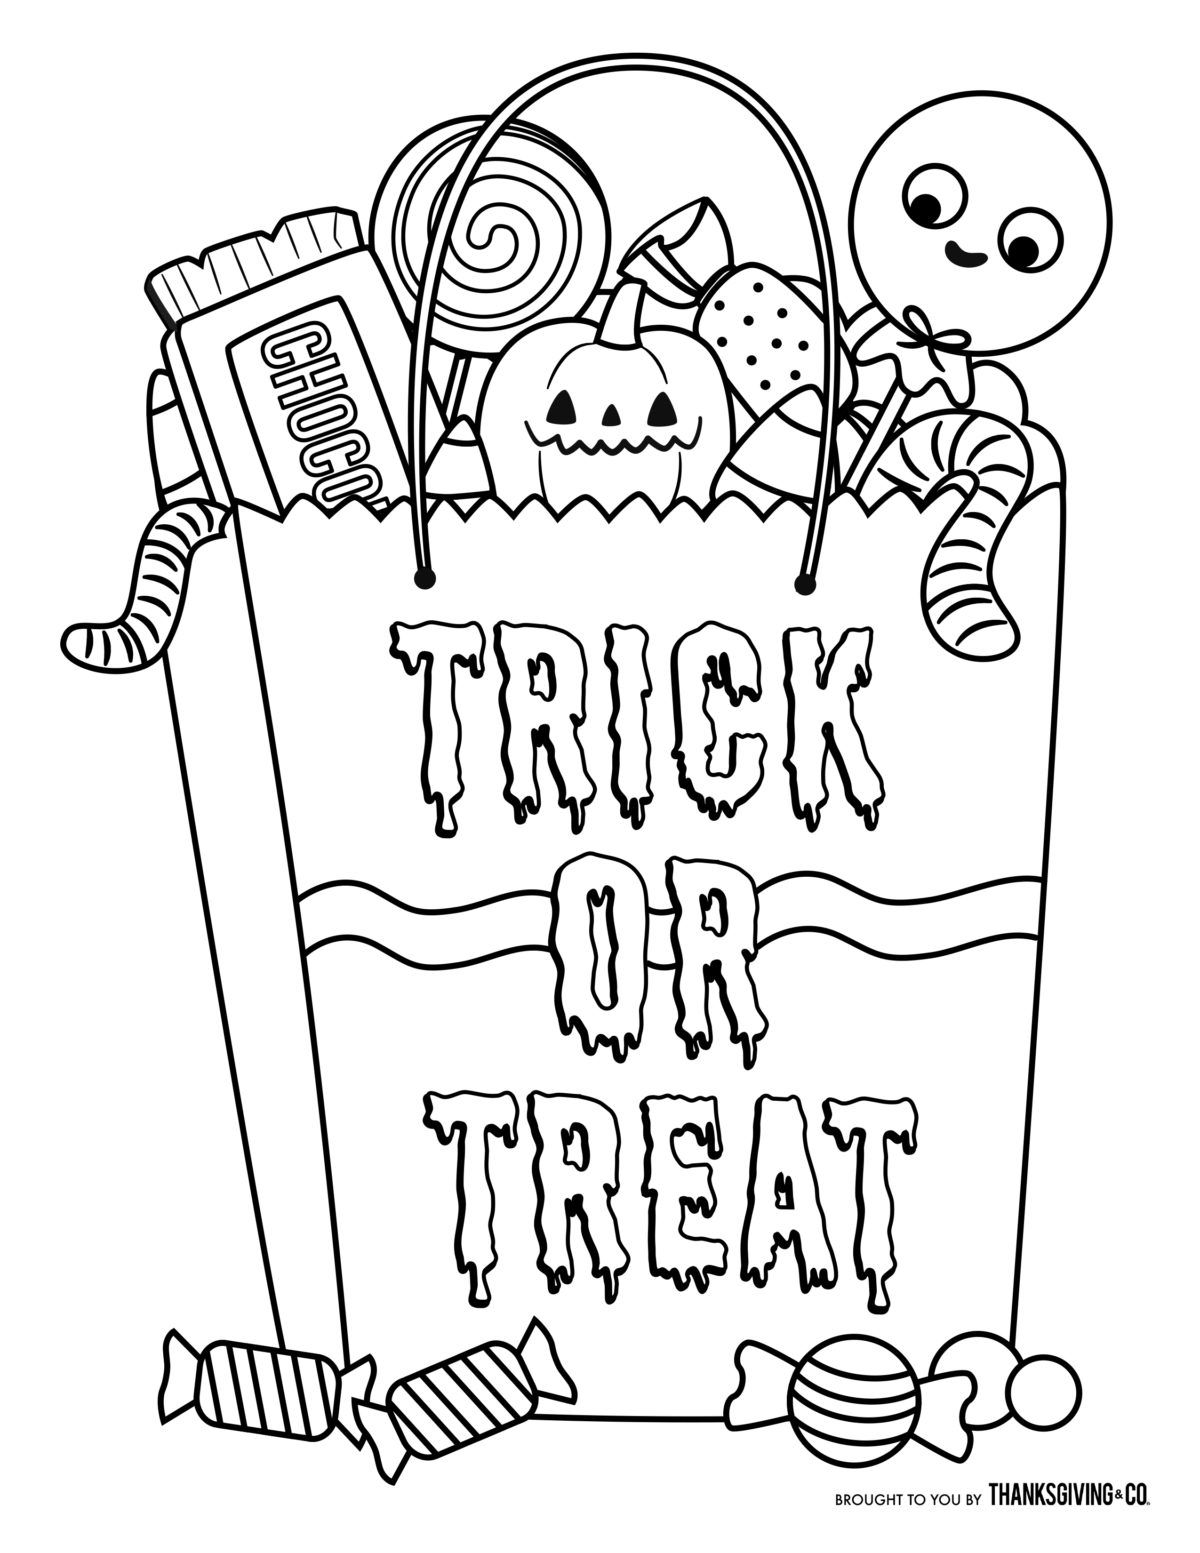 Trick or treat! Halloween candy bag coloring page | Halloween coloring pages  printable, Free halloween coloring pages, Monster coloring pages